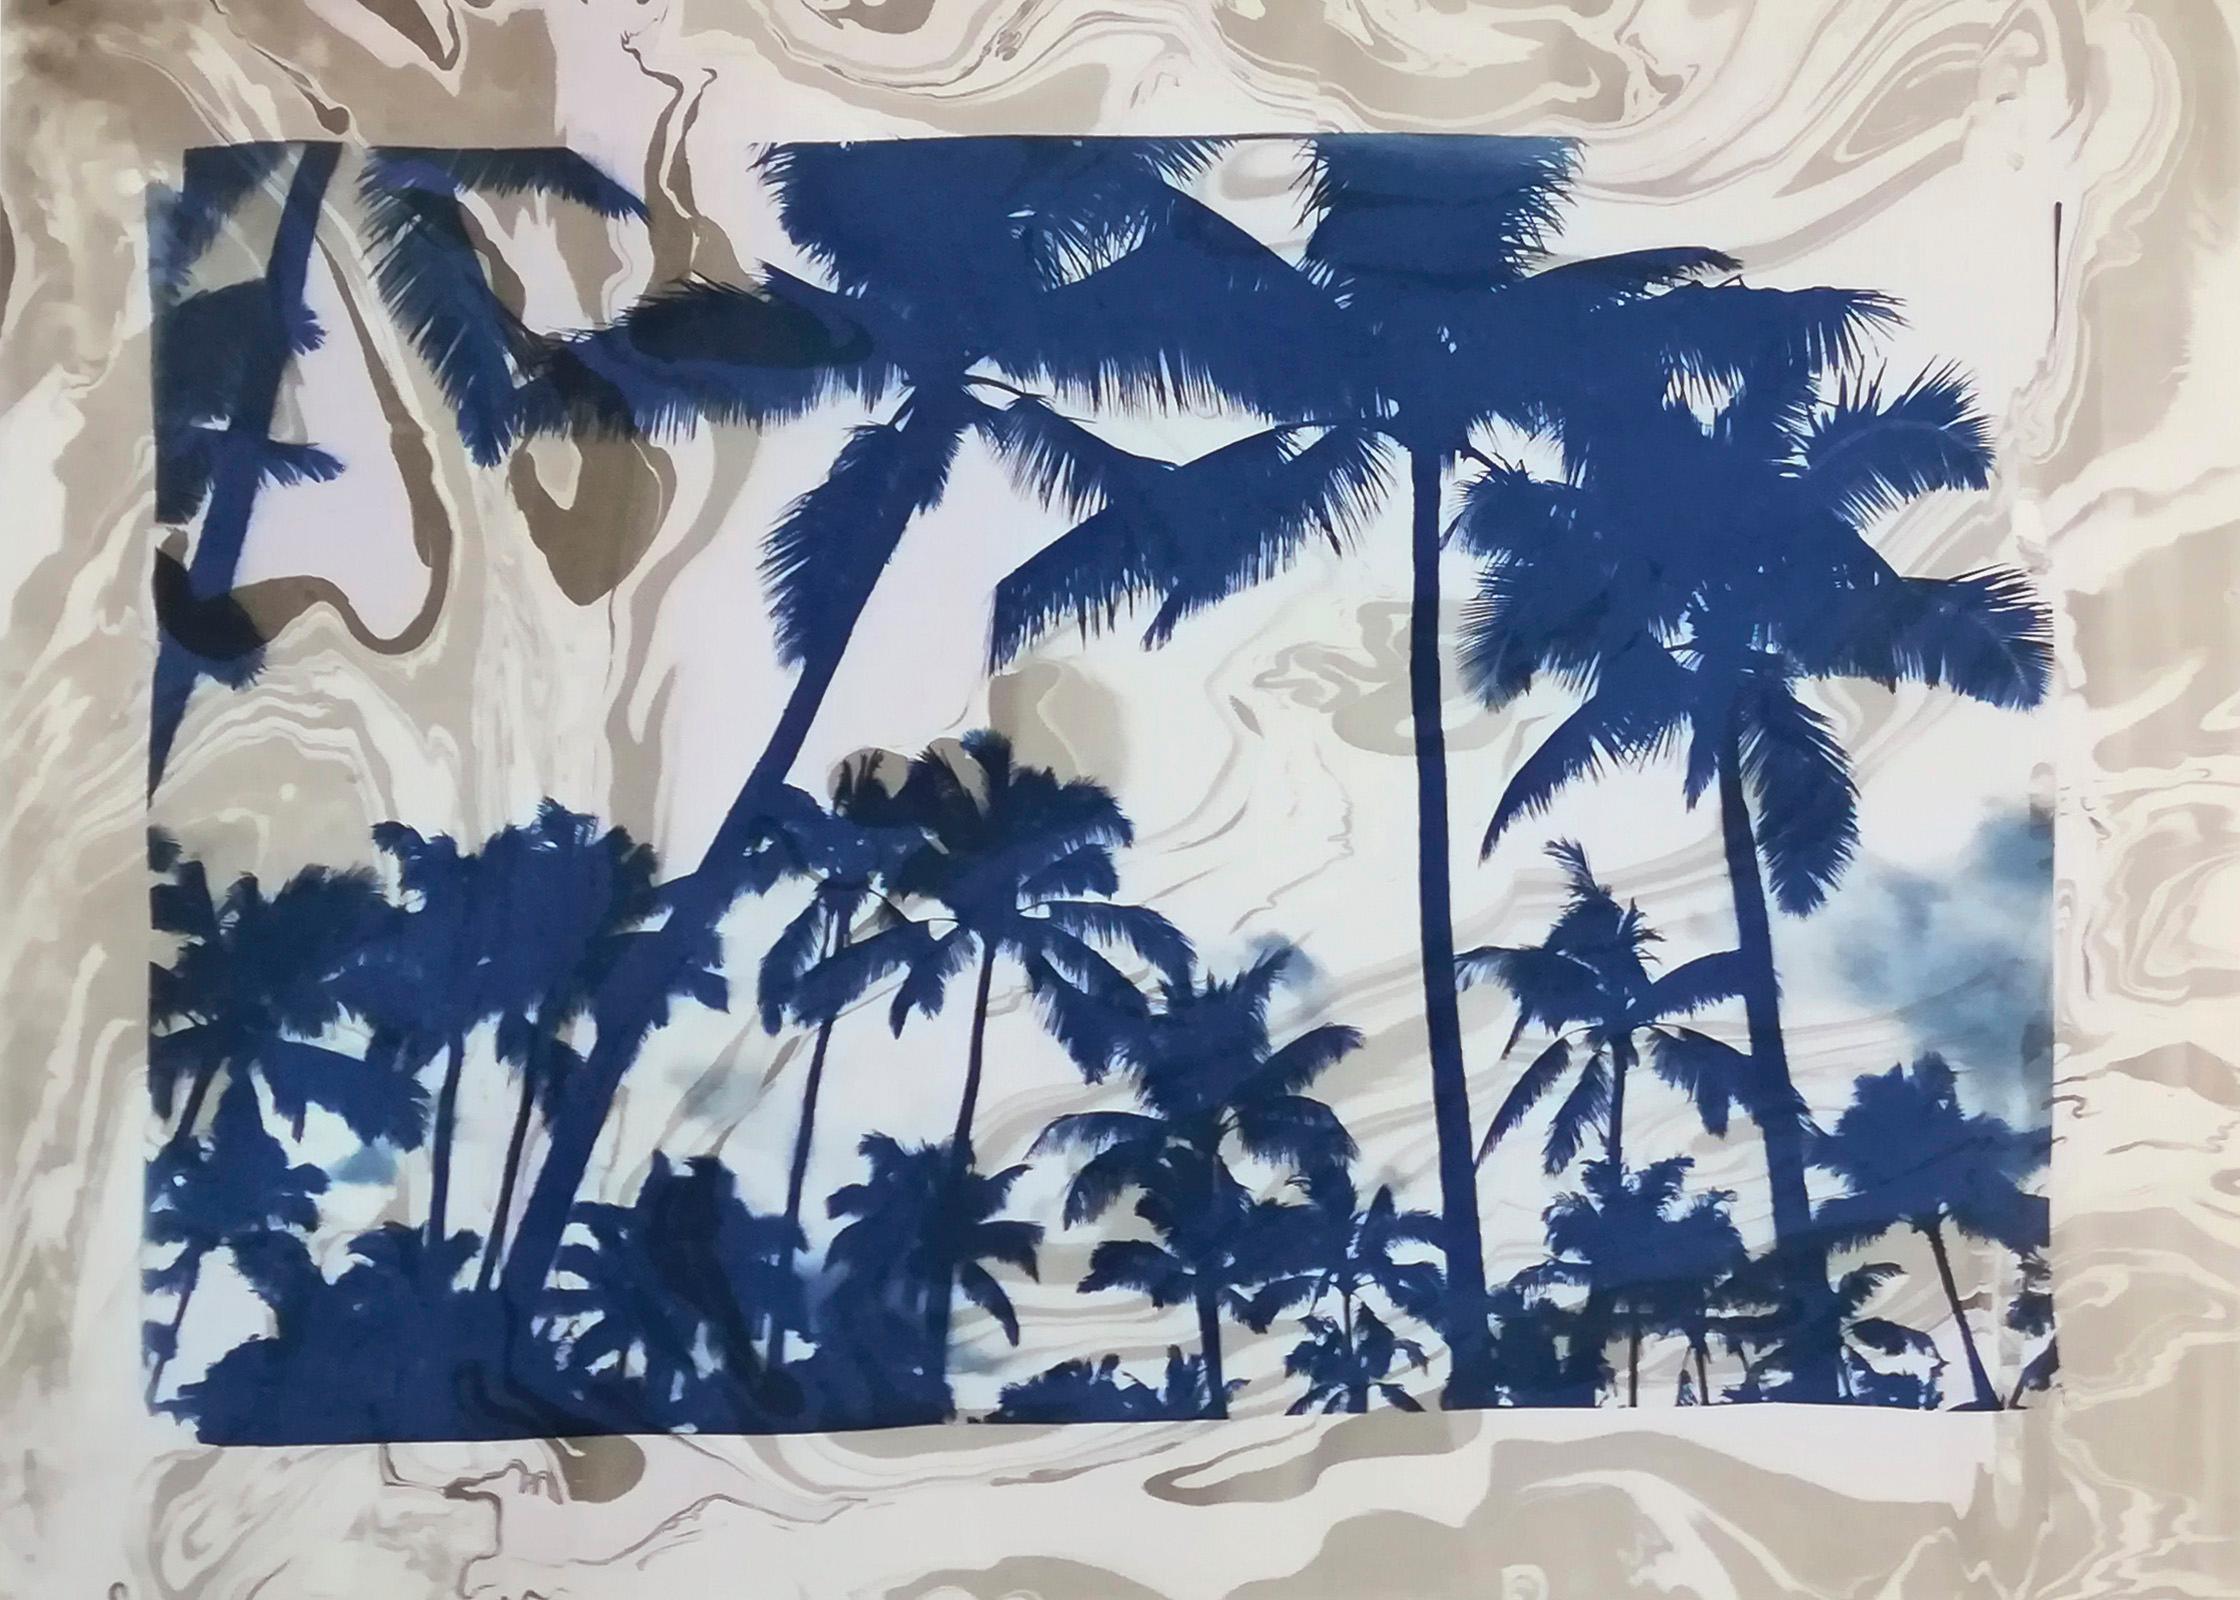  Palm Tree Cyanotype with Grey and Violet Sumi Ink Marbling Background, Unique 